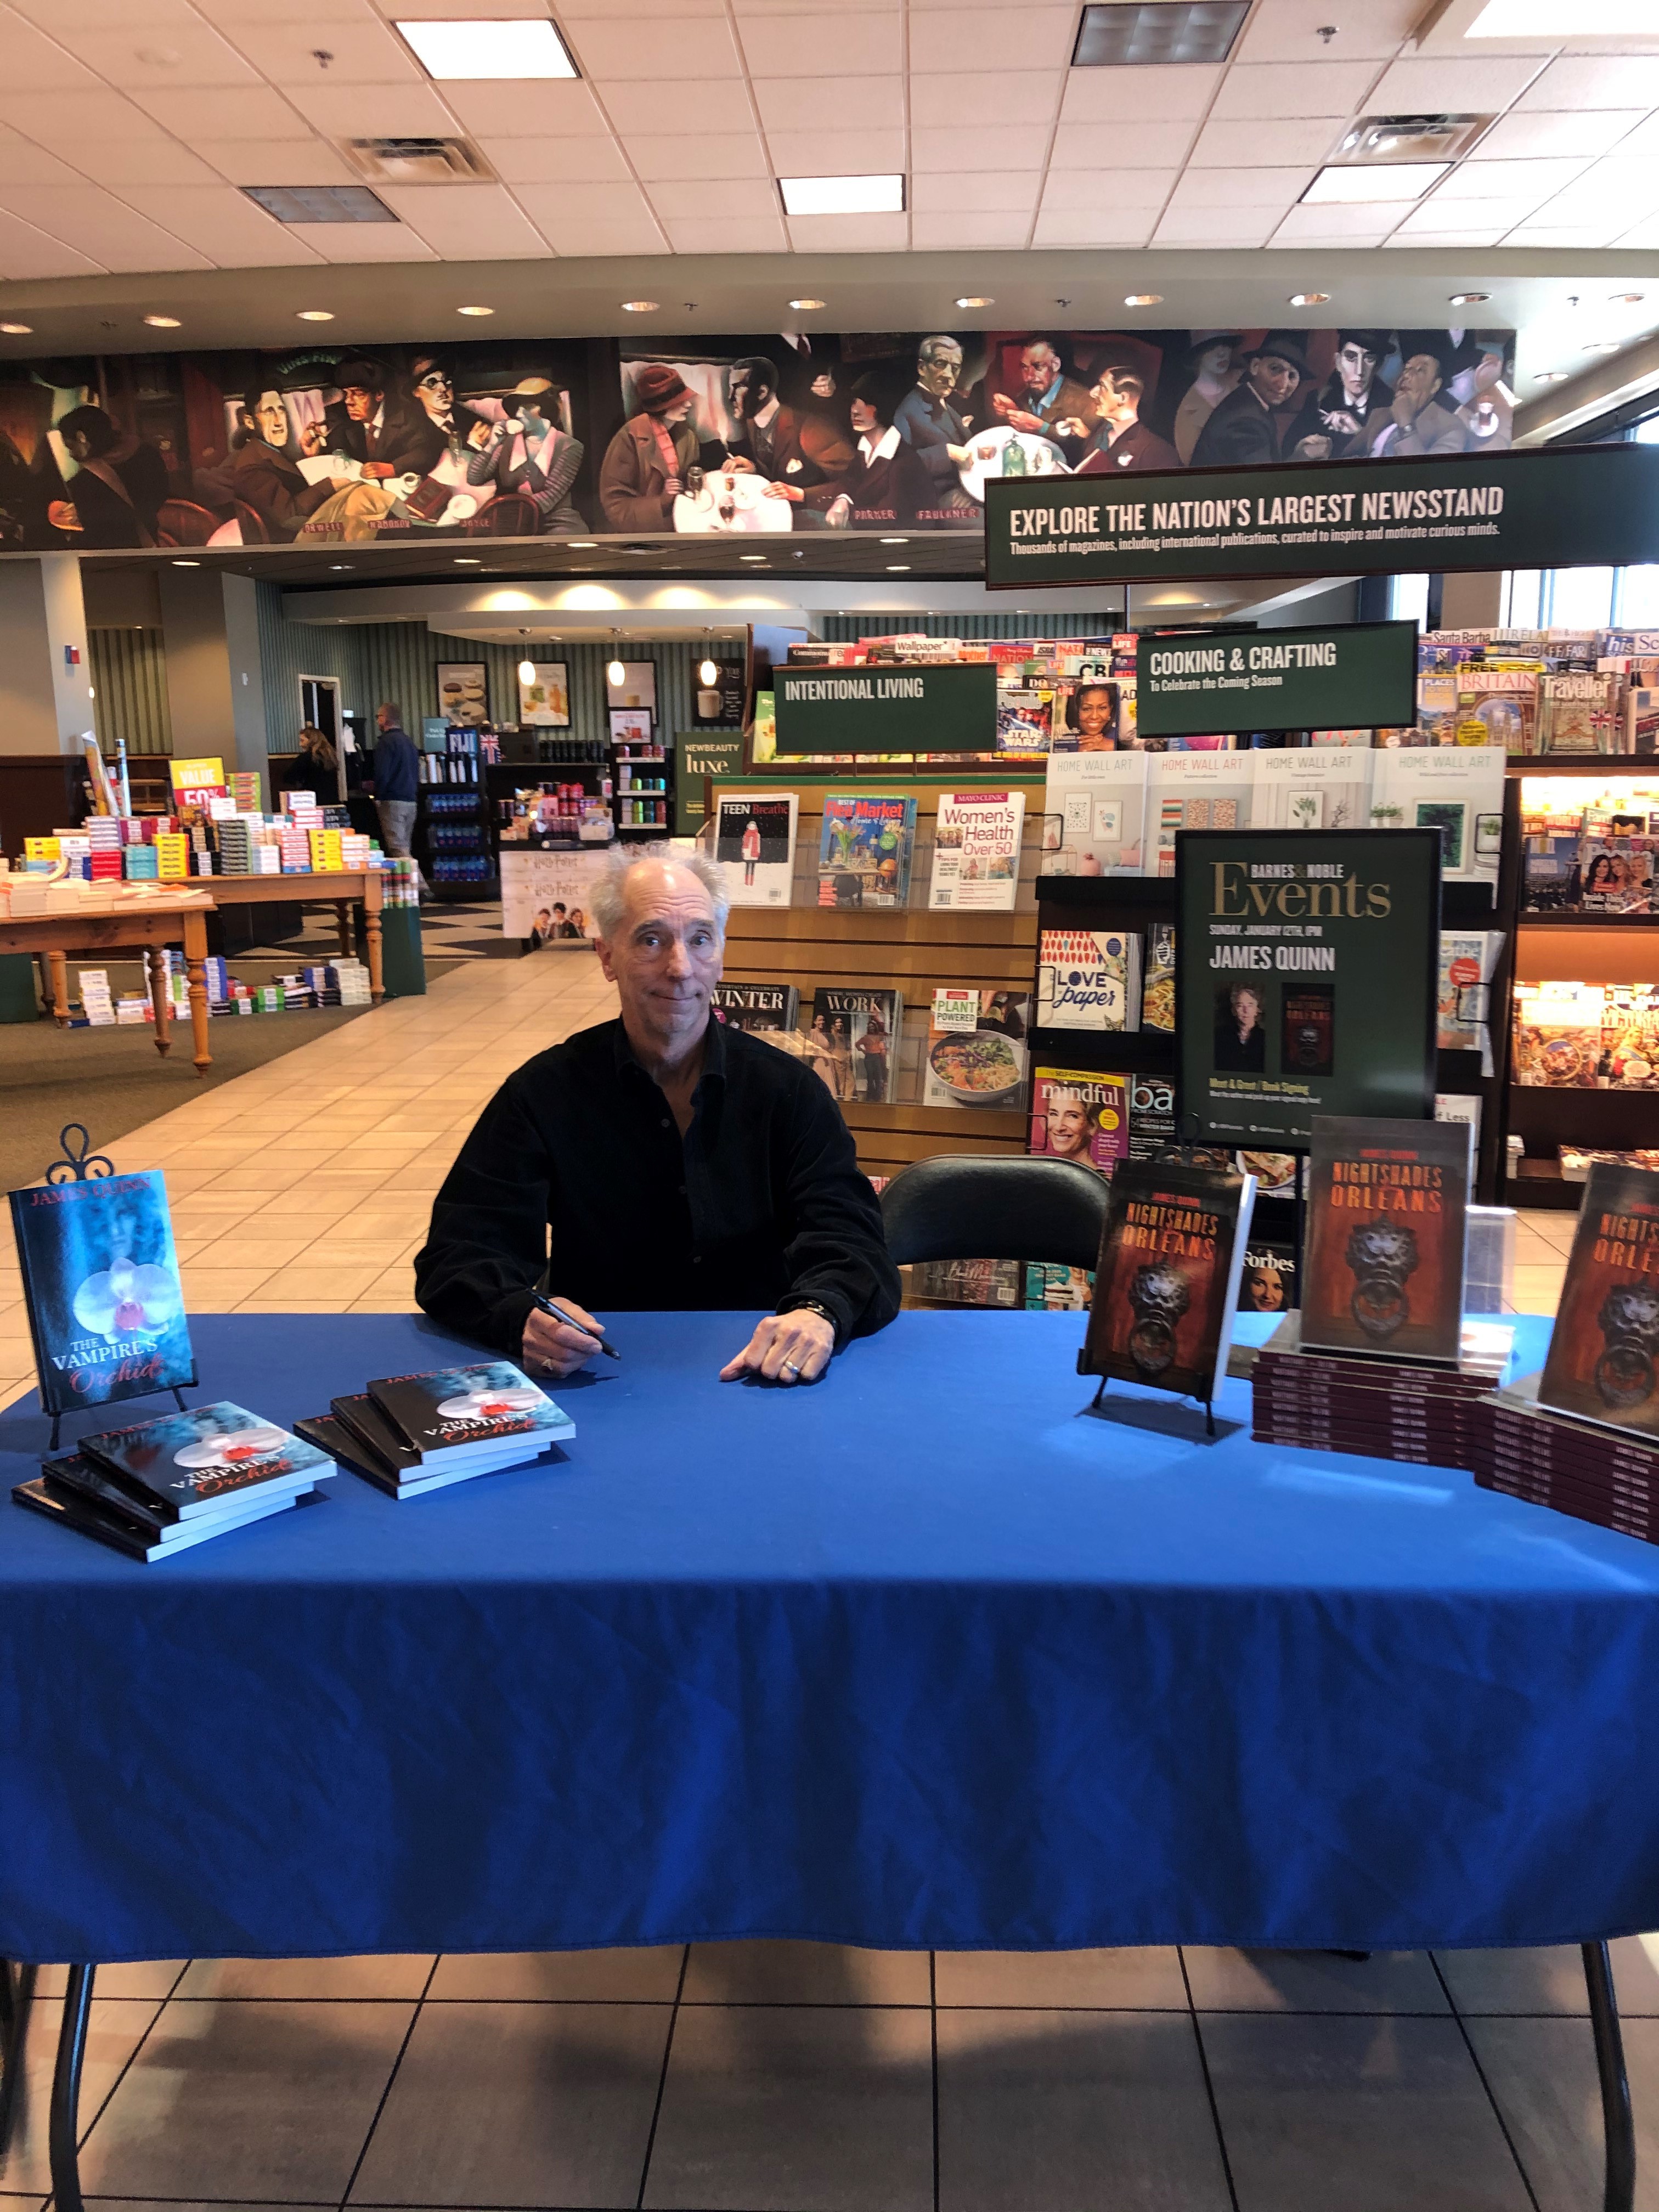 James Quinn, the Author of the Nightshades of New Orleans, attended a Book Signing Event at Barnes & Noble